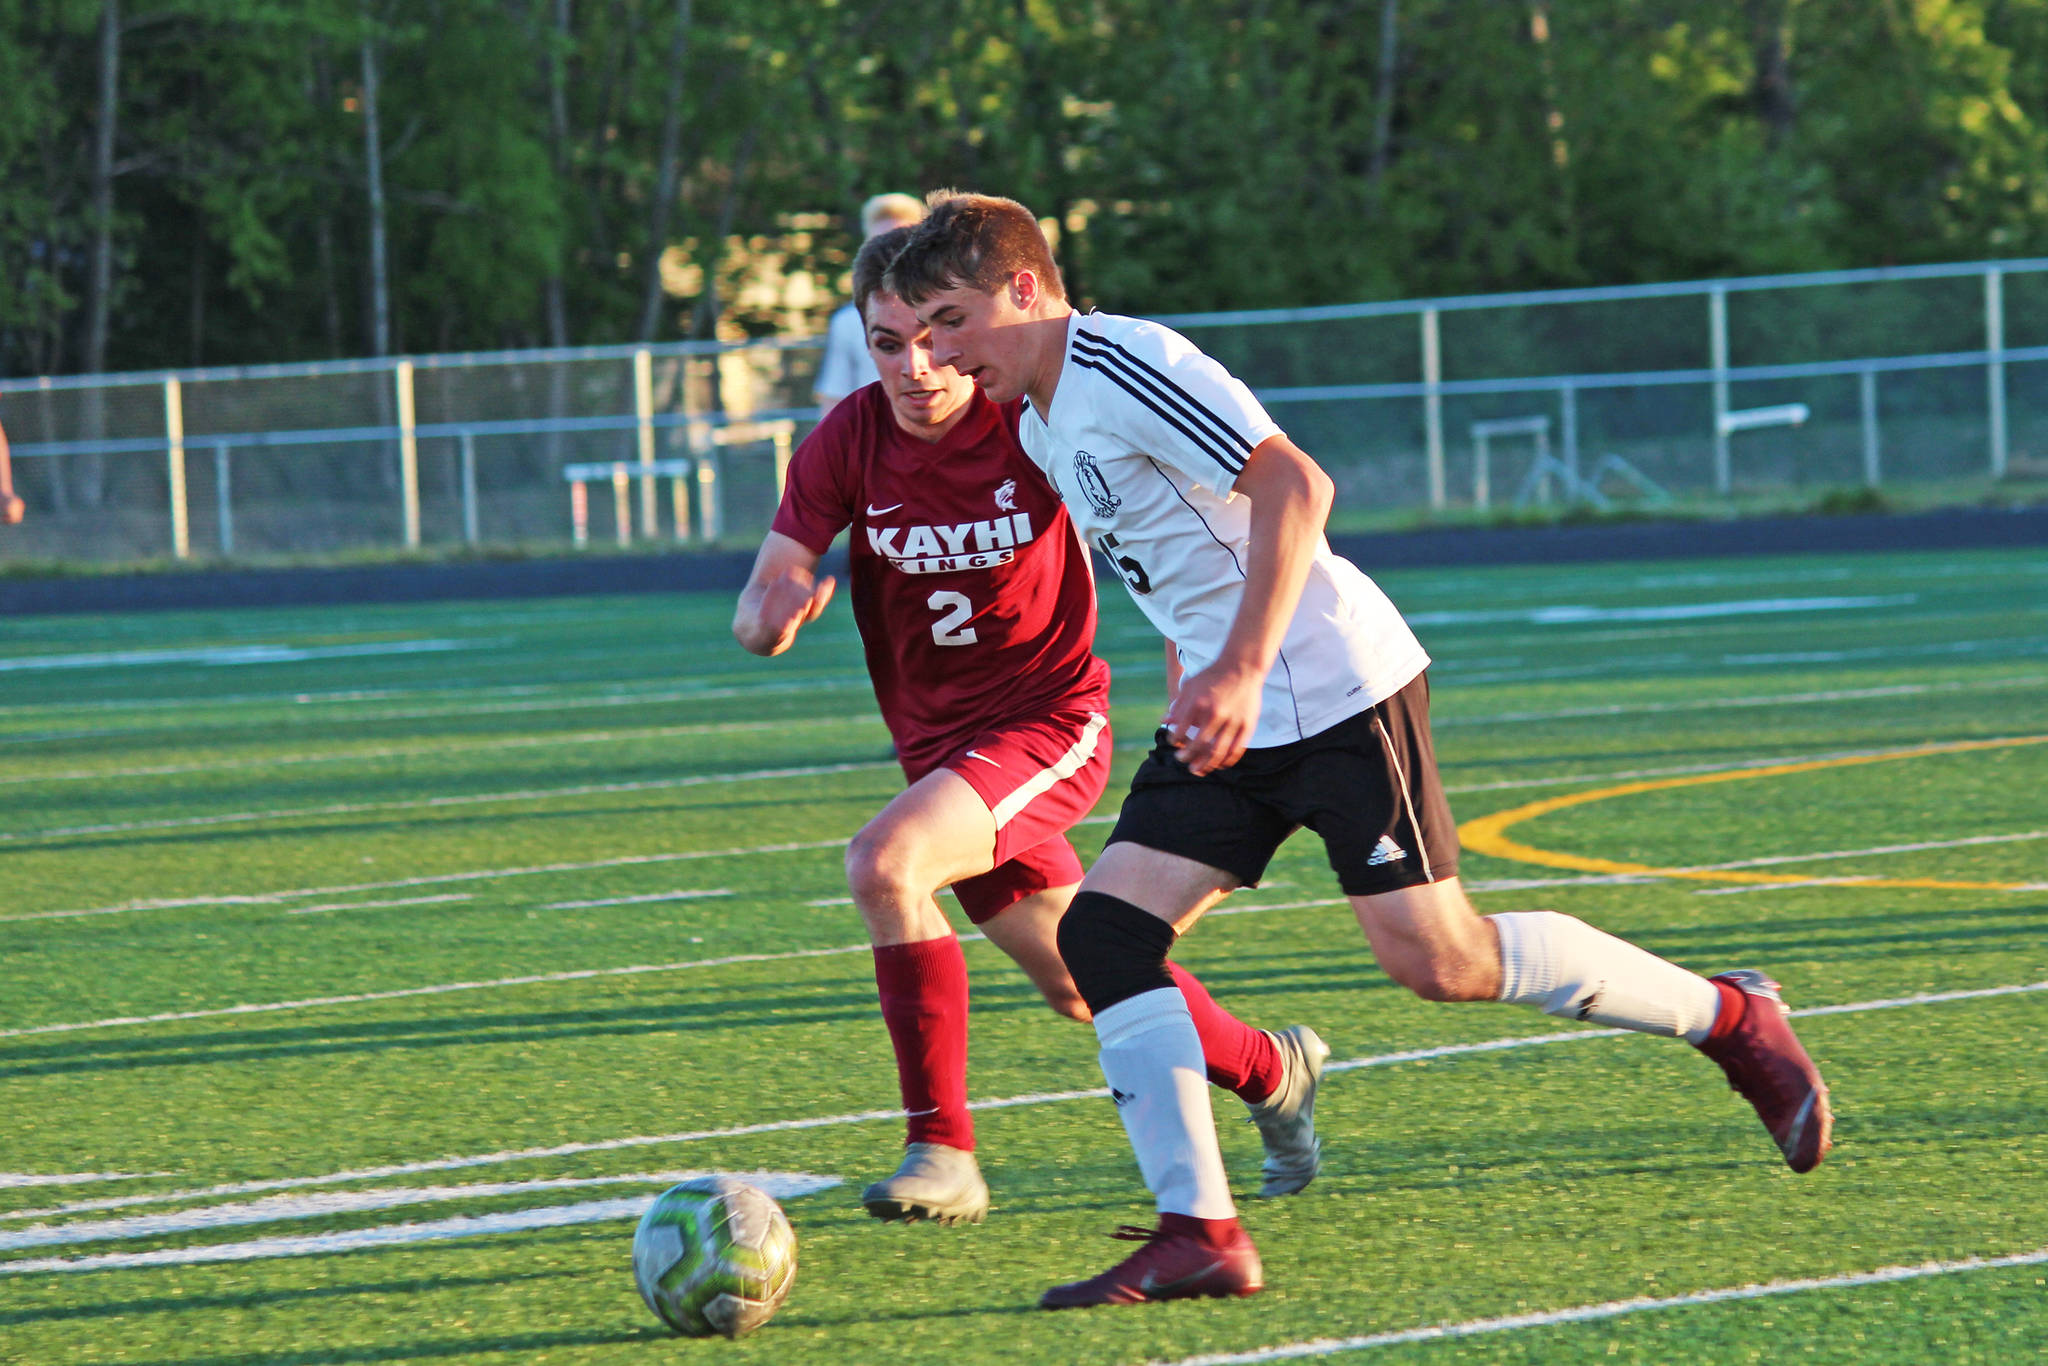 Ketchikan’s Jake Taylor (left) and Kenai’s Tucker Vann race to the ball during a Friday, May 24, 2019 semifinal match in the Division II state soccer championships at West Anchorage High School in Anchorage, Alaska. (Photo by Megan Pacer/Homer News)